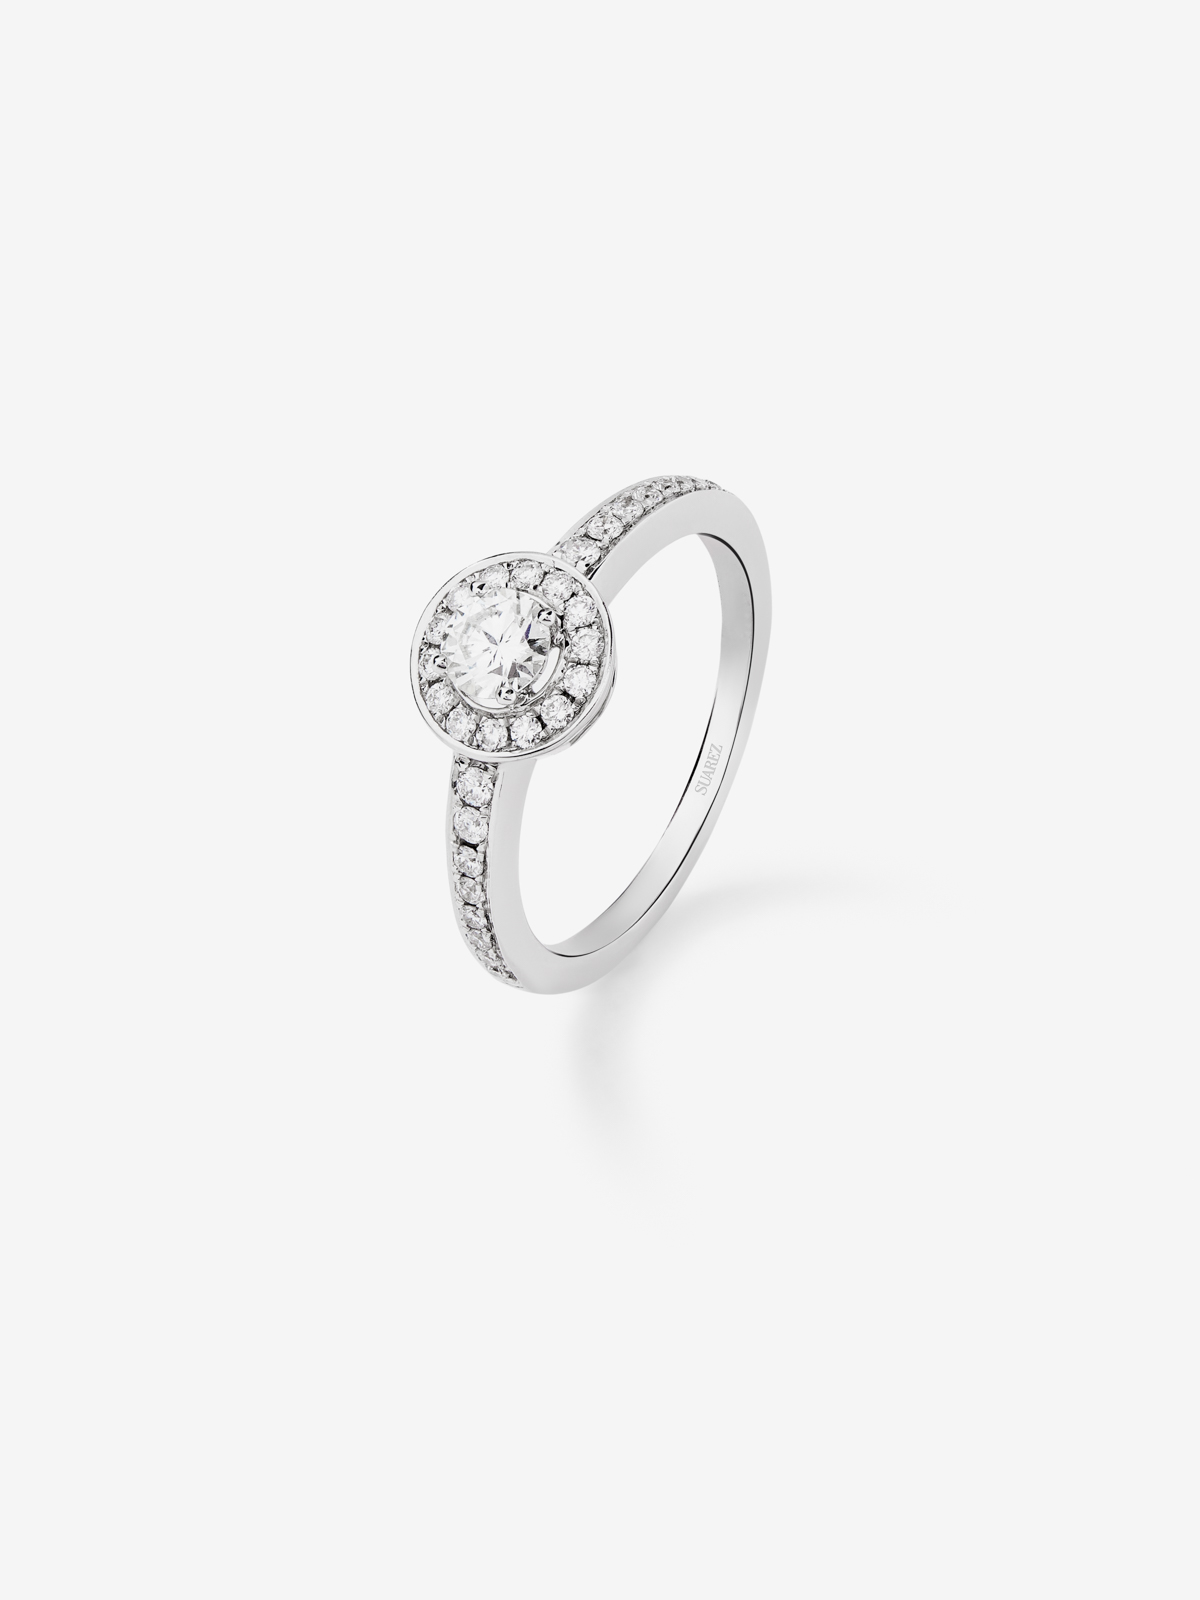 18K white gold solitaire engagement ring with a halo of diamonds